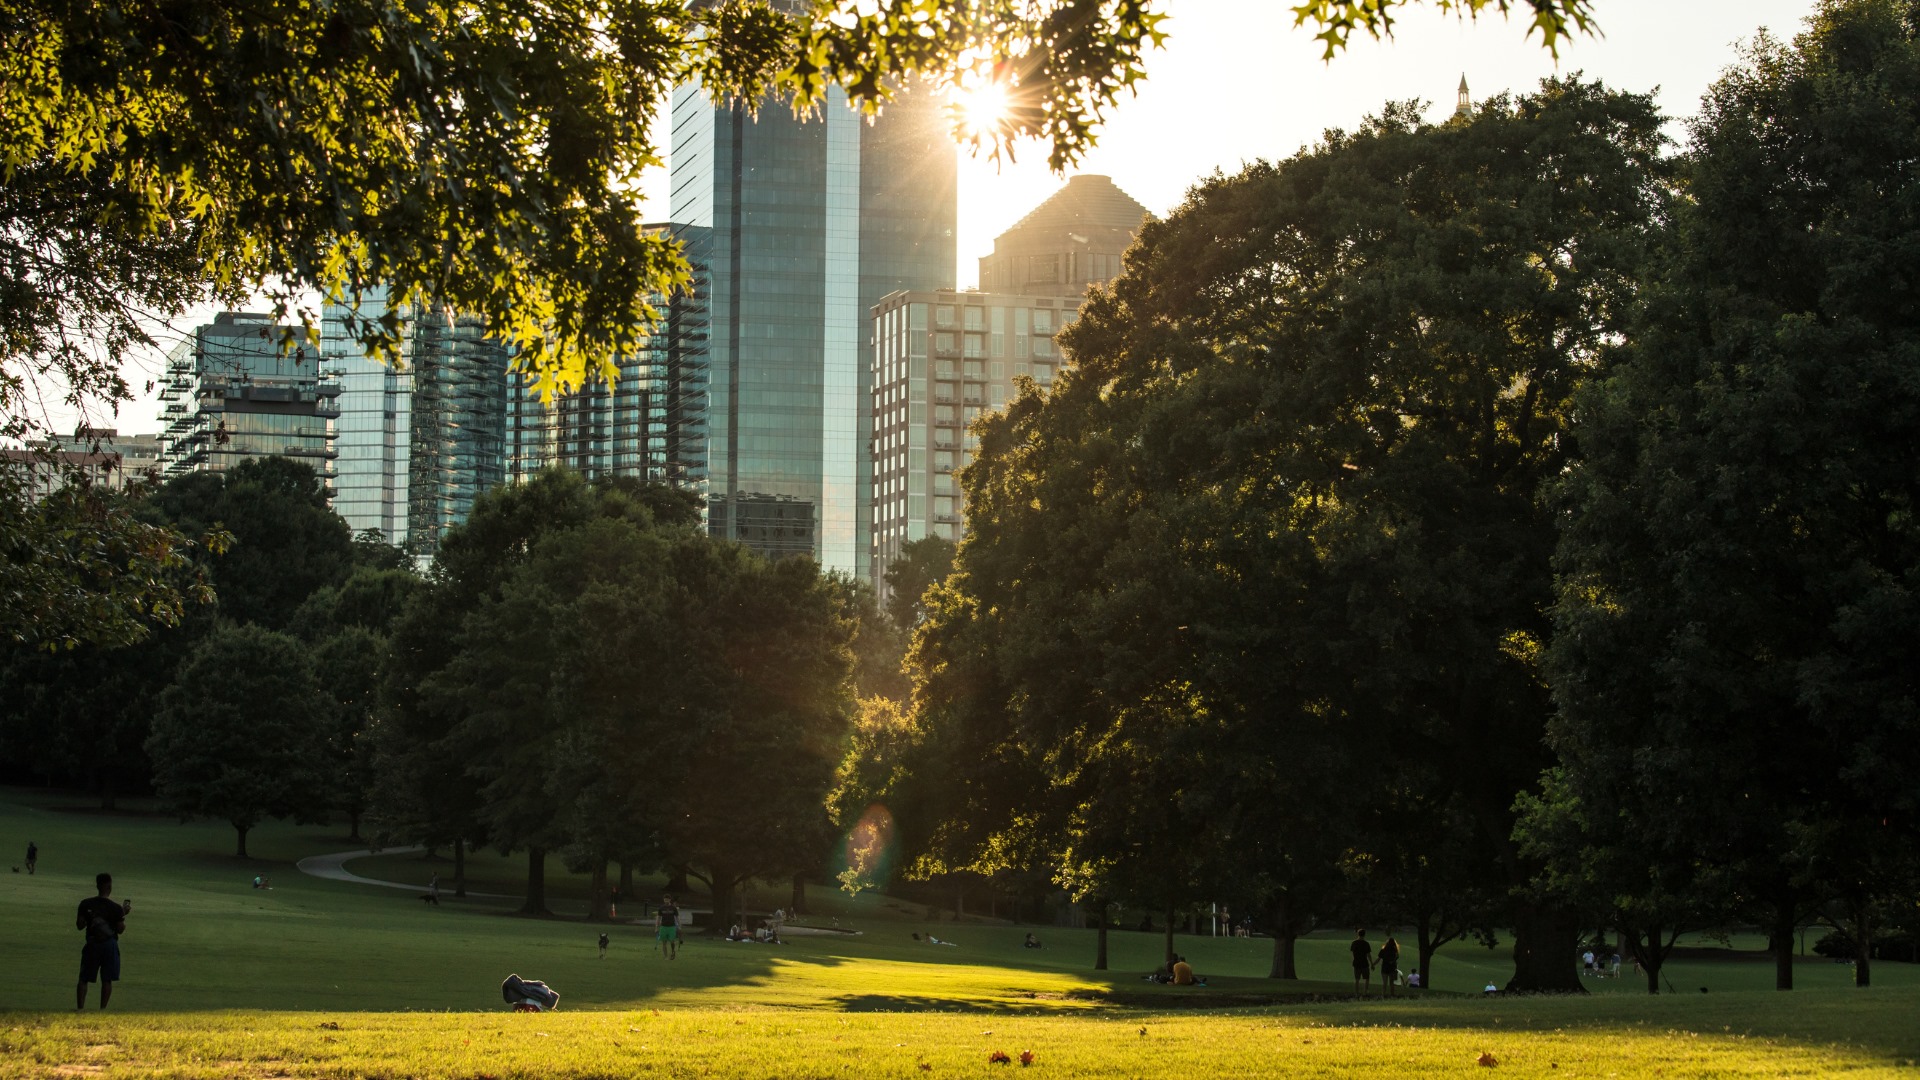 The sun setting over the skyscrapers provides a warm glow overlooking a grassy meadow in Piedmont Park on a summer evening in Atlanta, GA. 